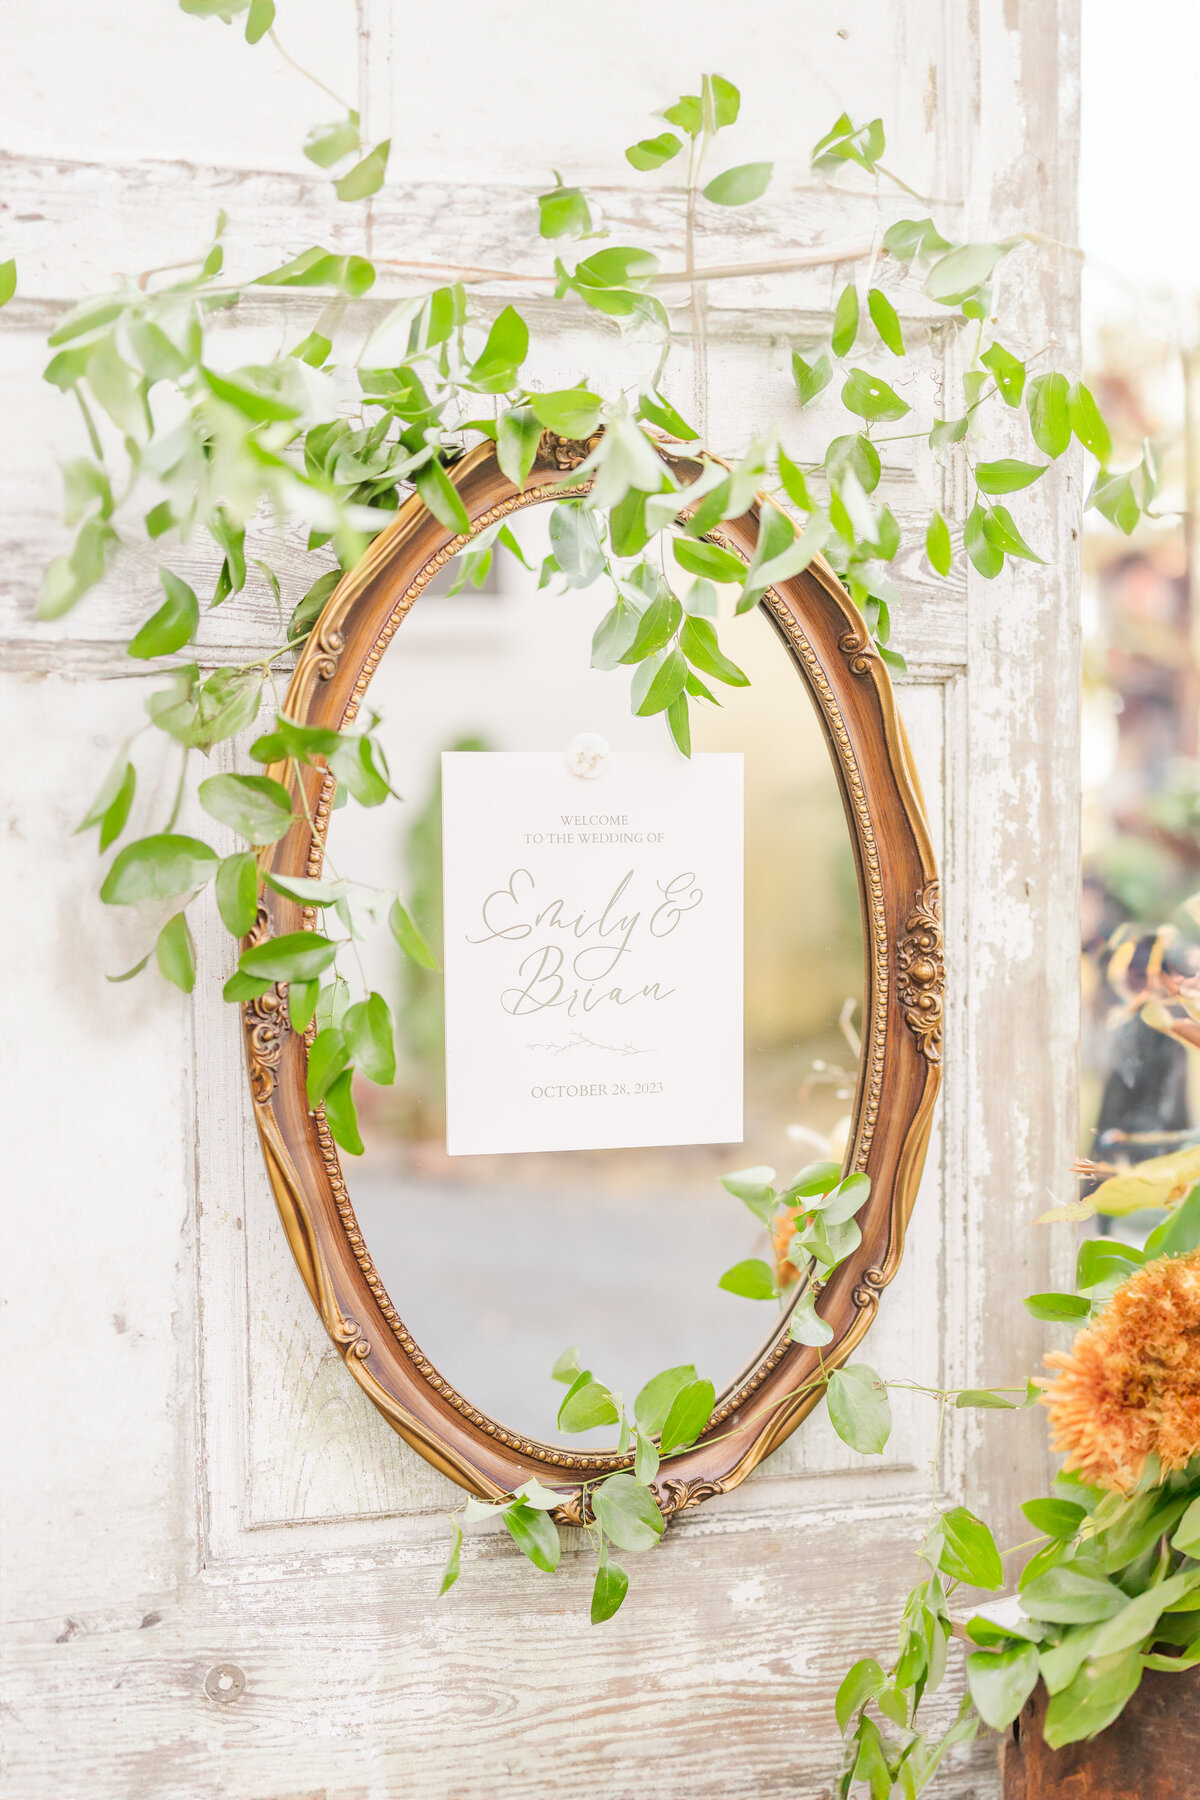 A mirror hangs on a wooden door with a wedding announcement stuck to it